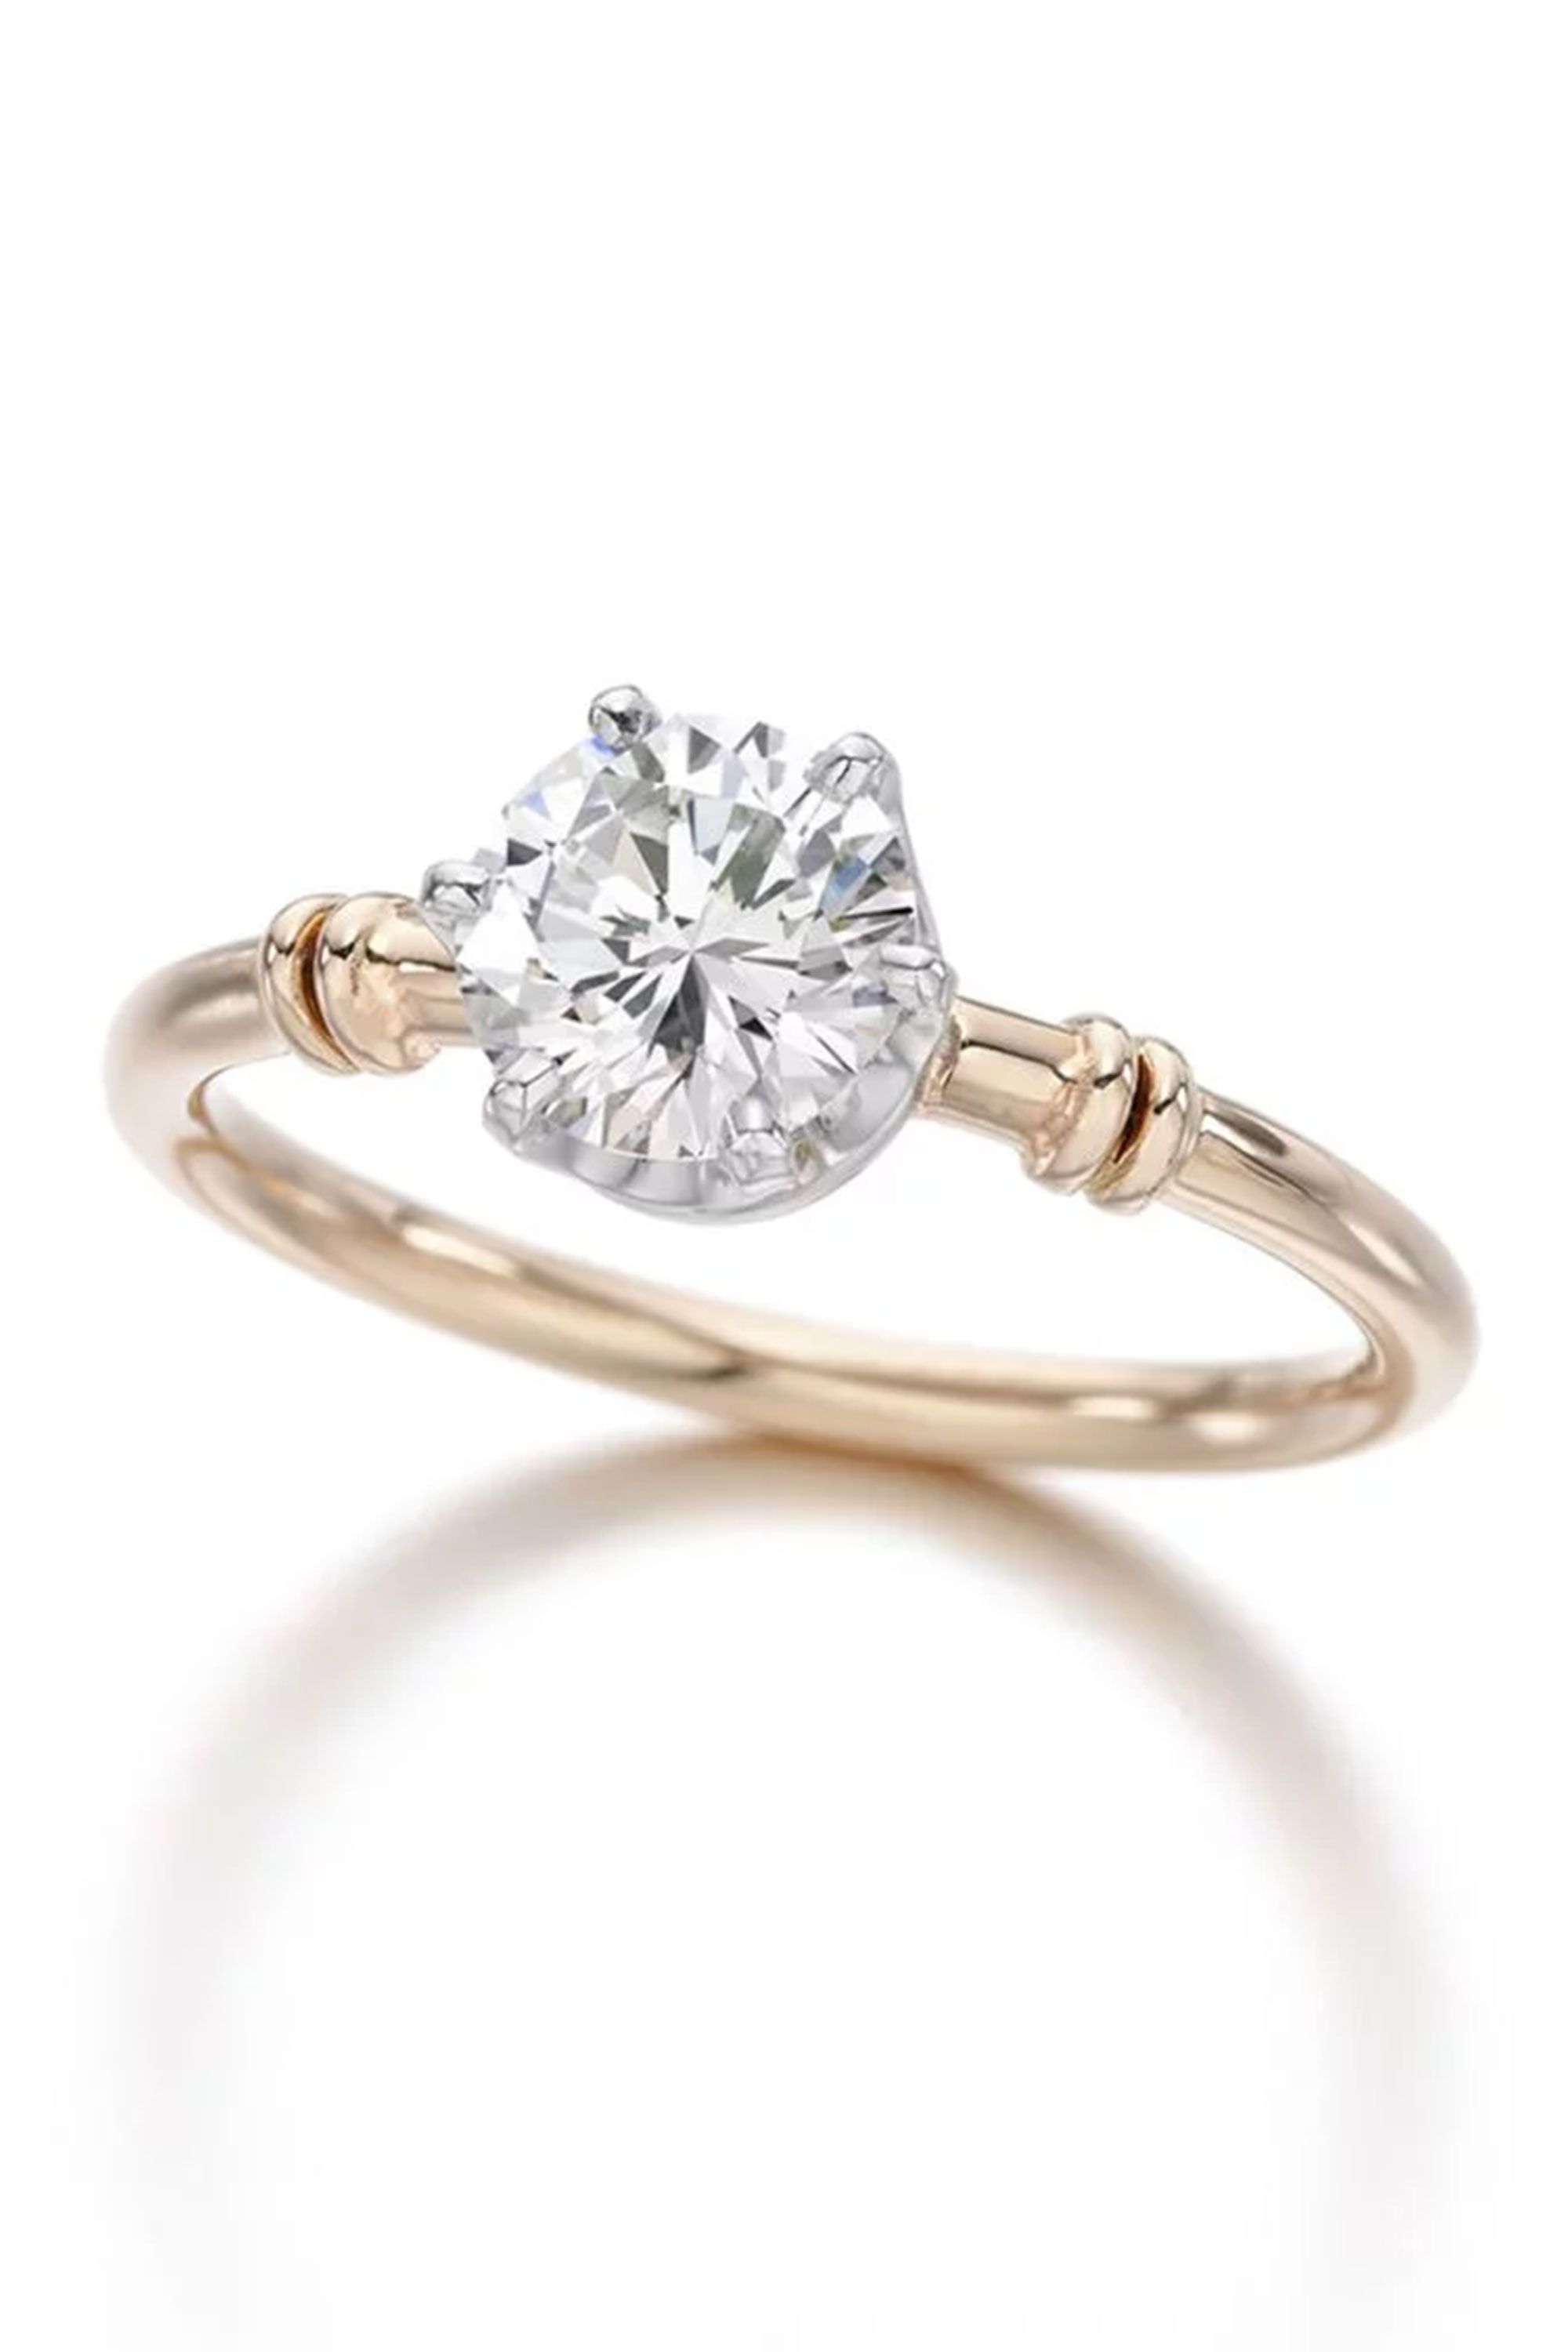 Best engagement rings - Jessica McCormack